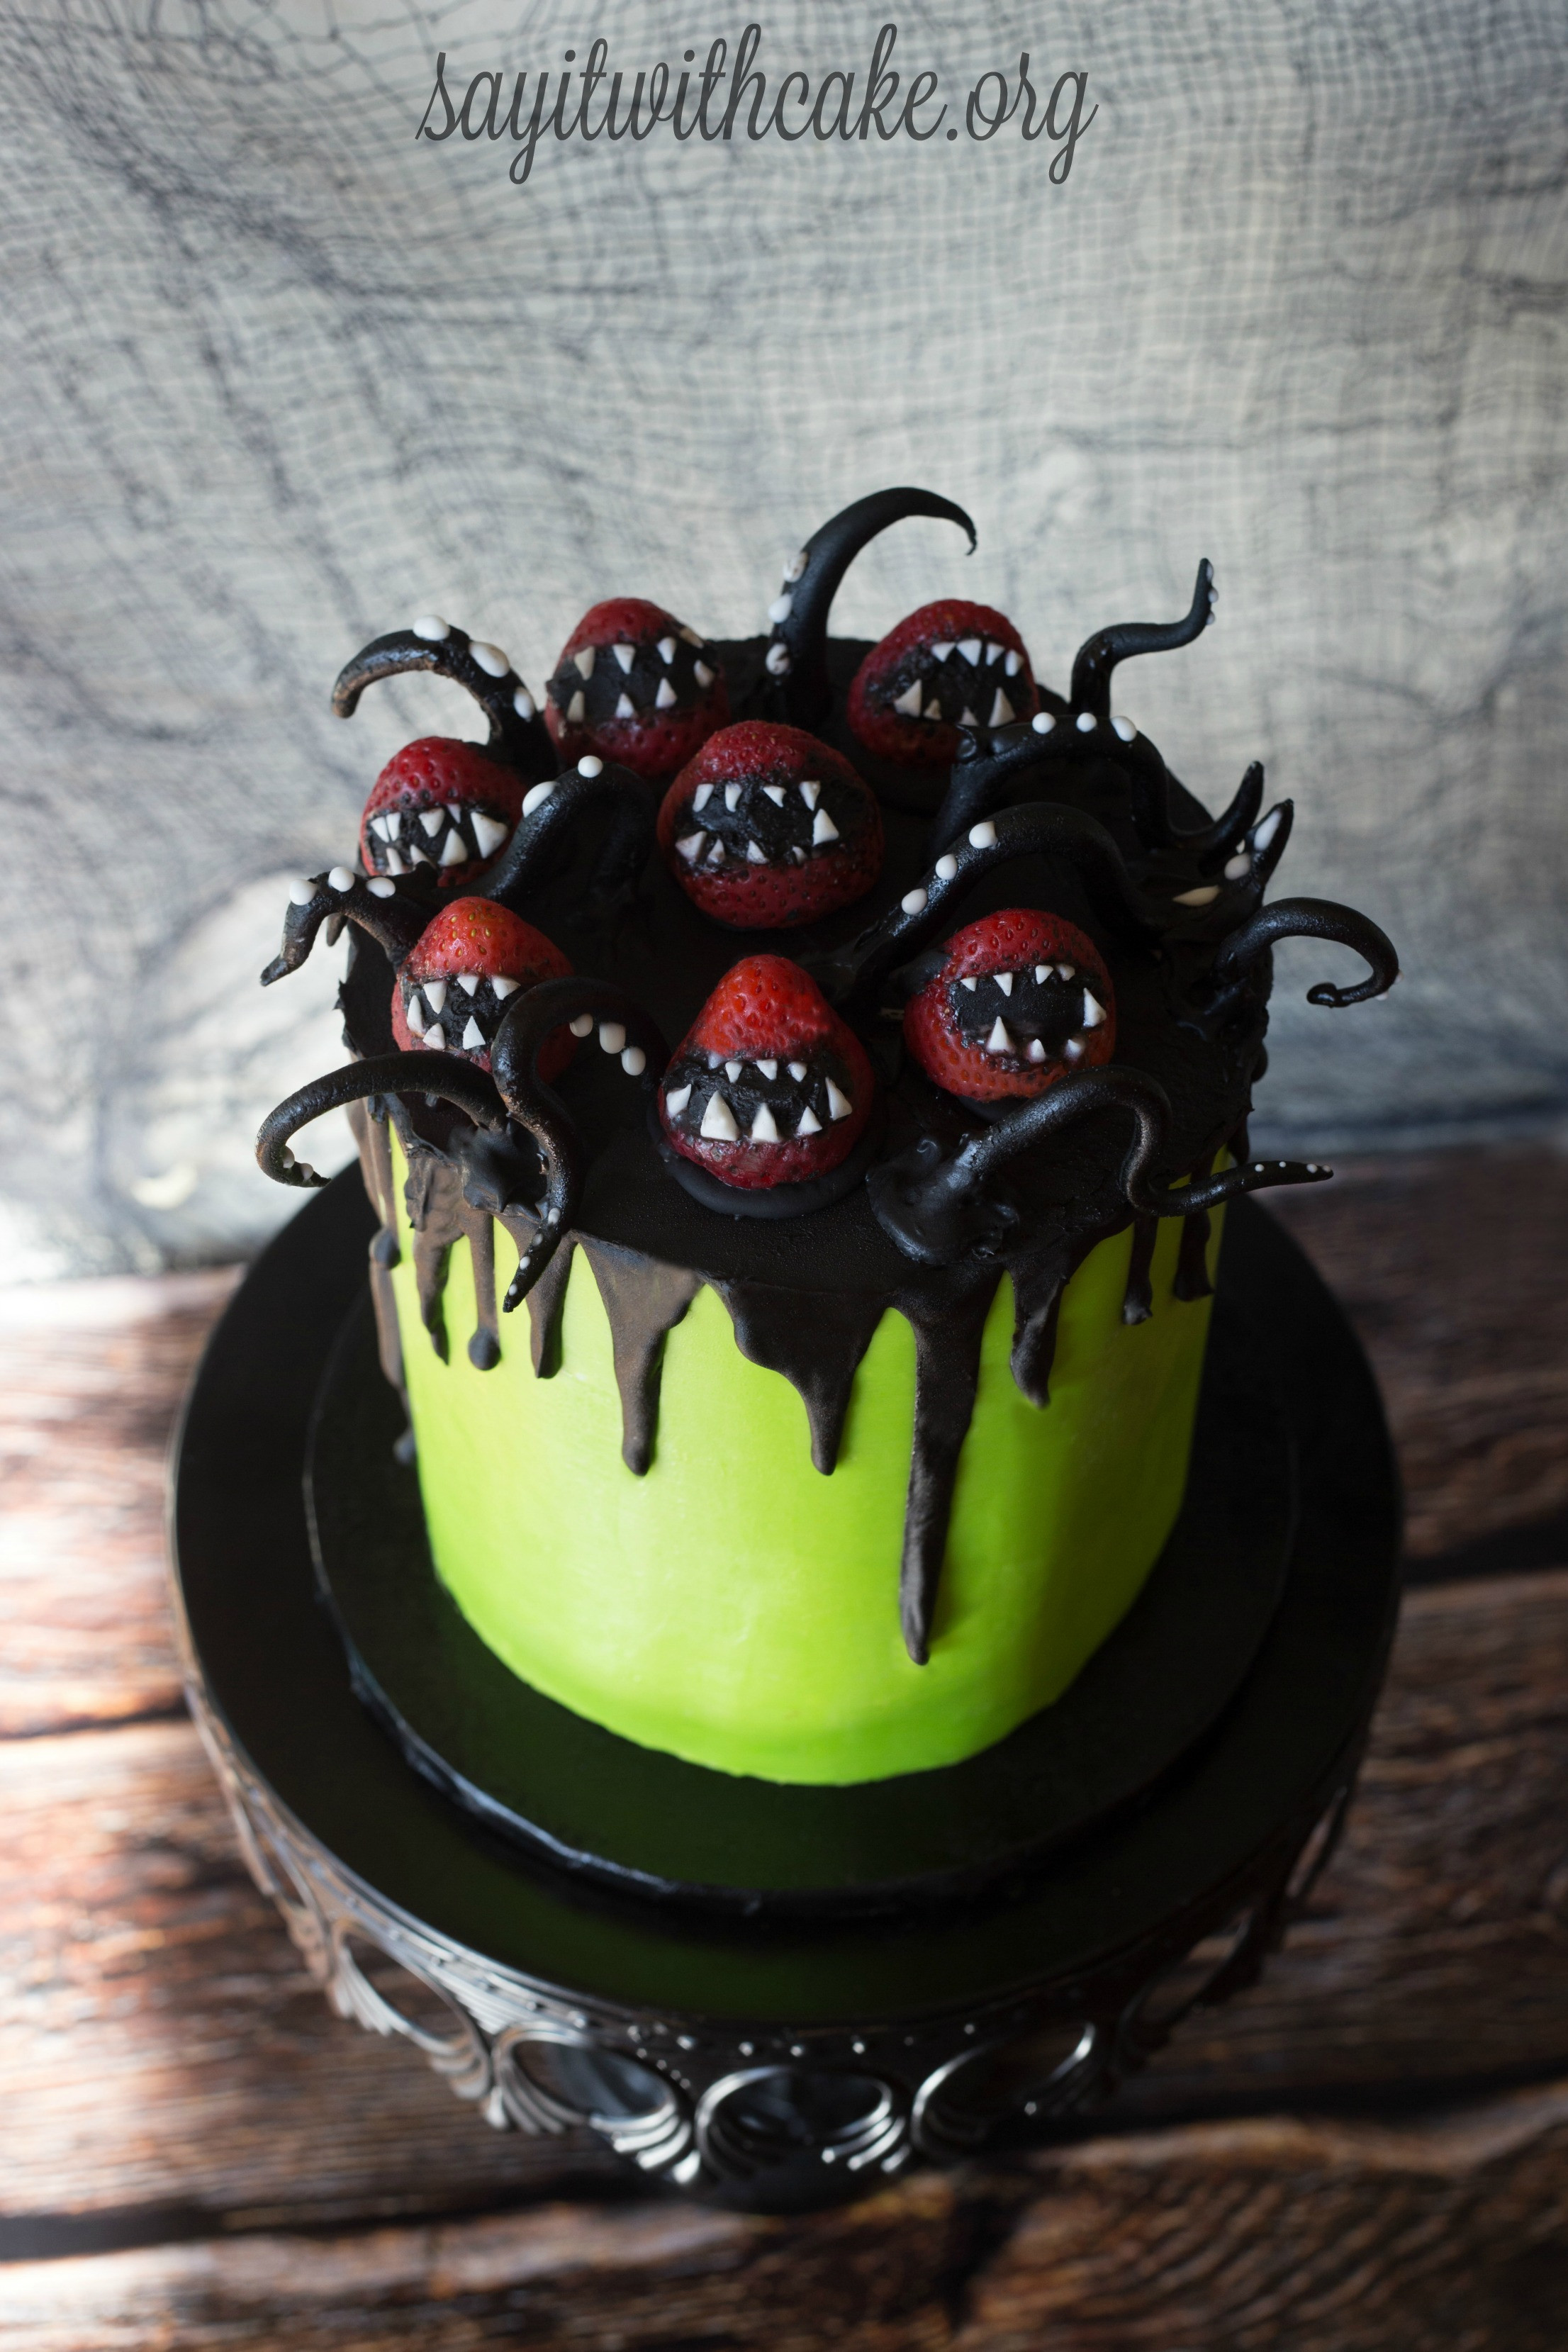 Creepy Halloween Cakes
 Creepy Halloween Cake – Say it With Cake